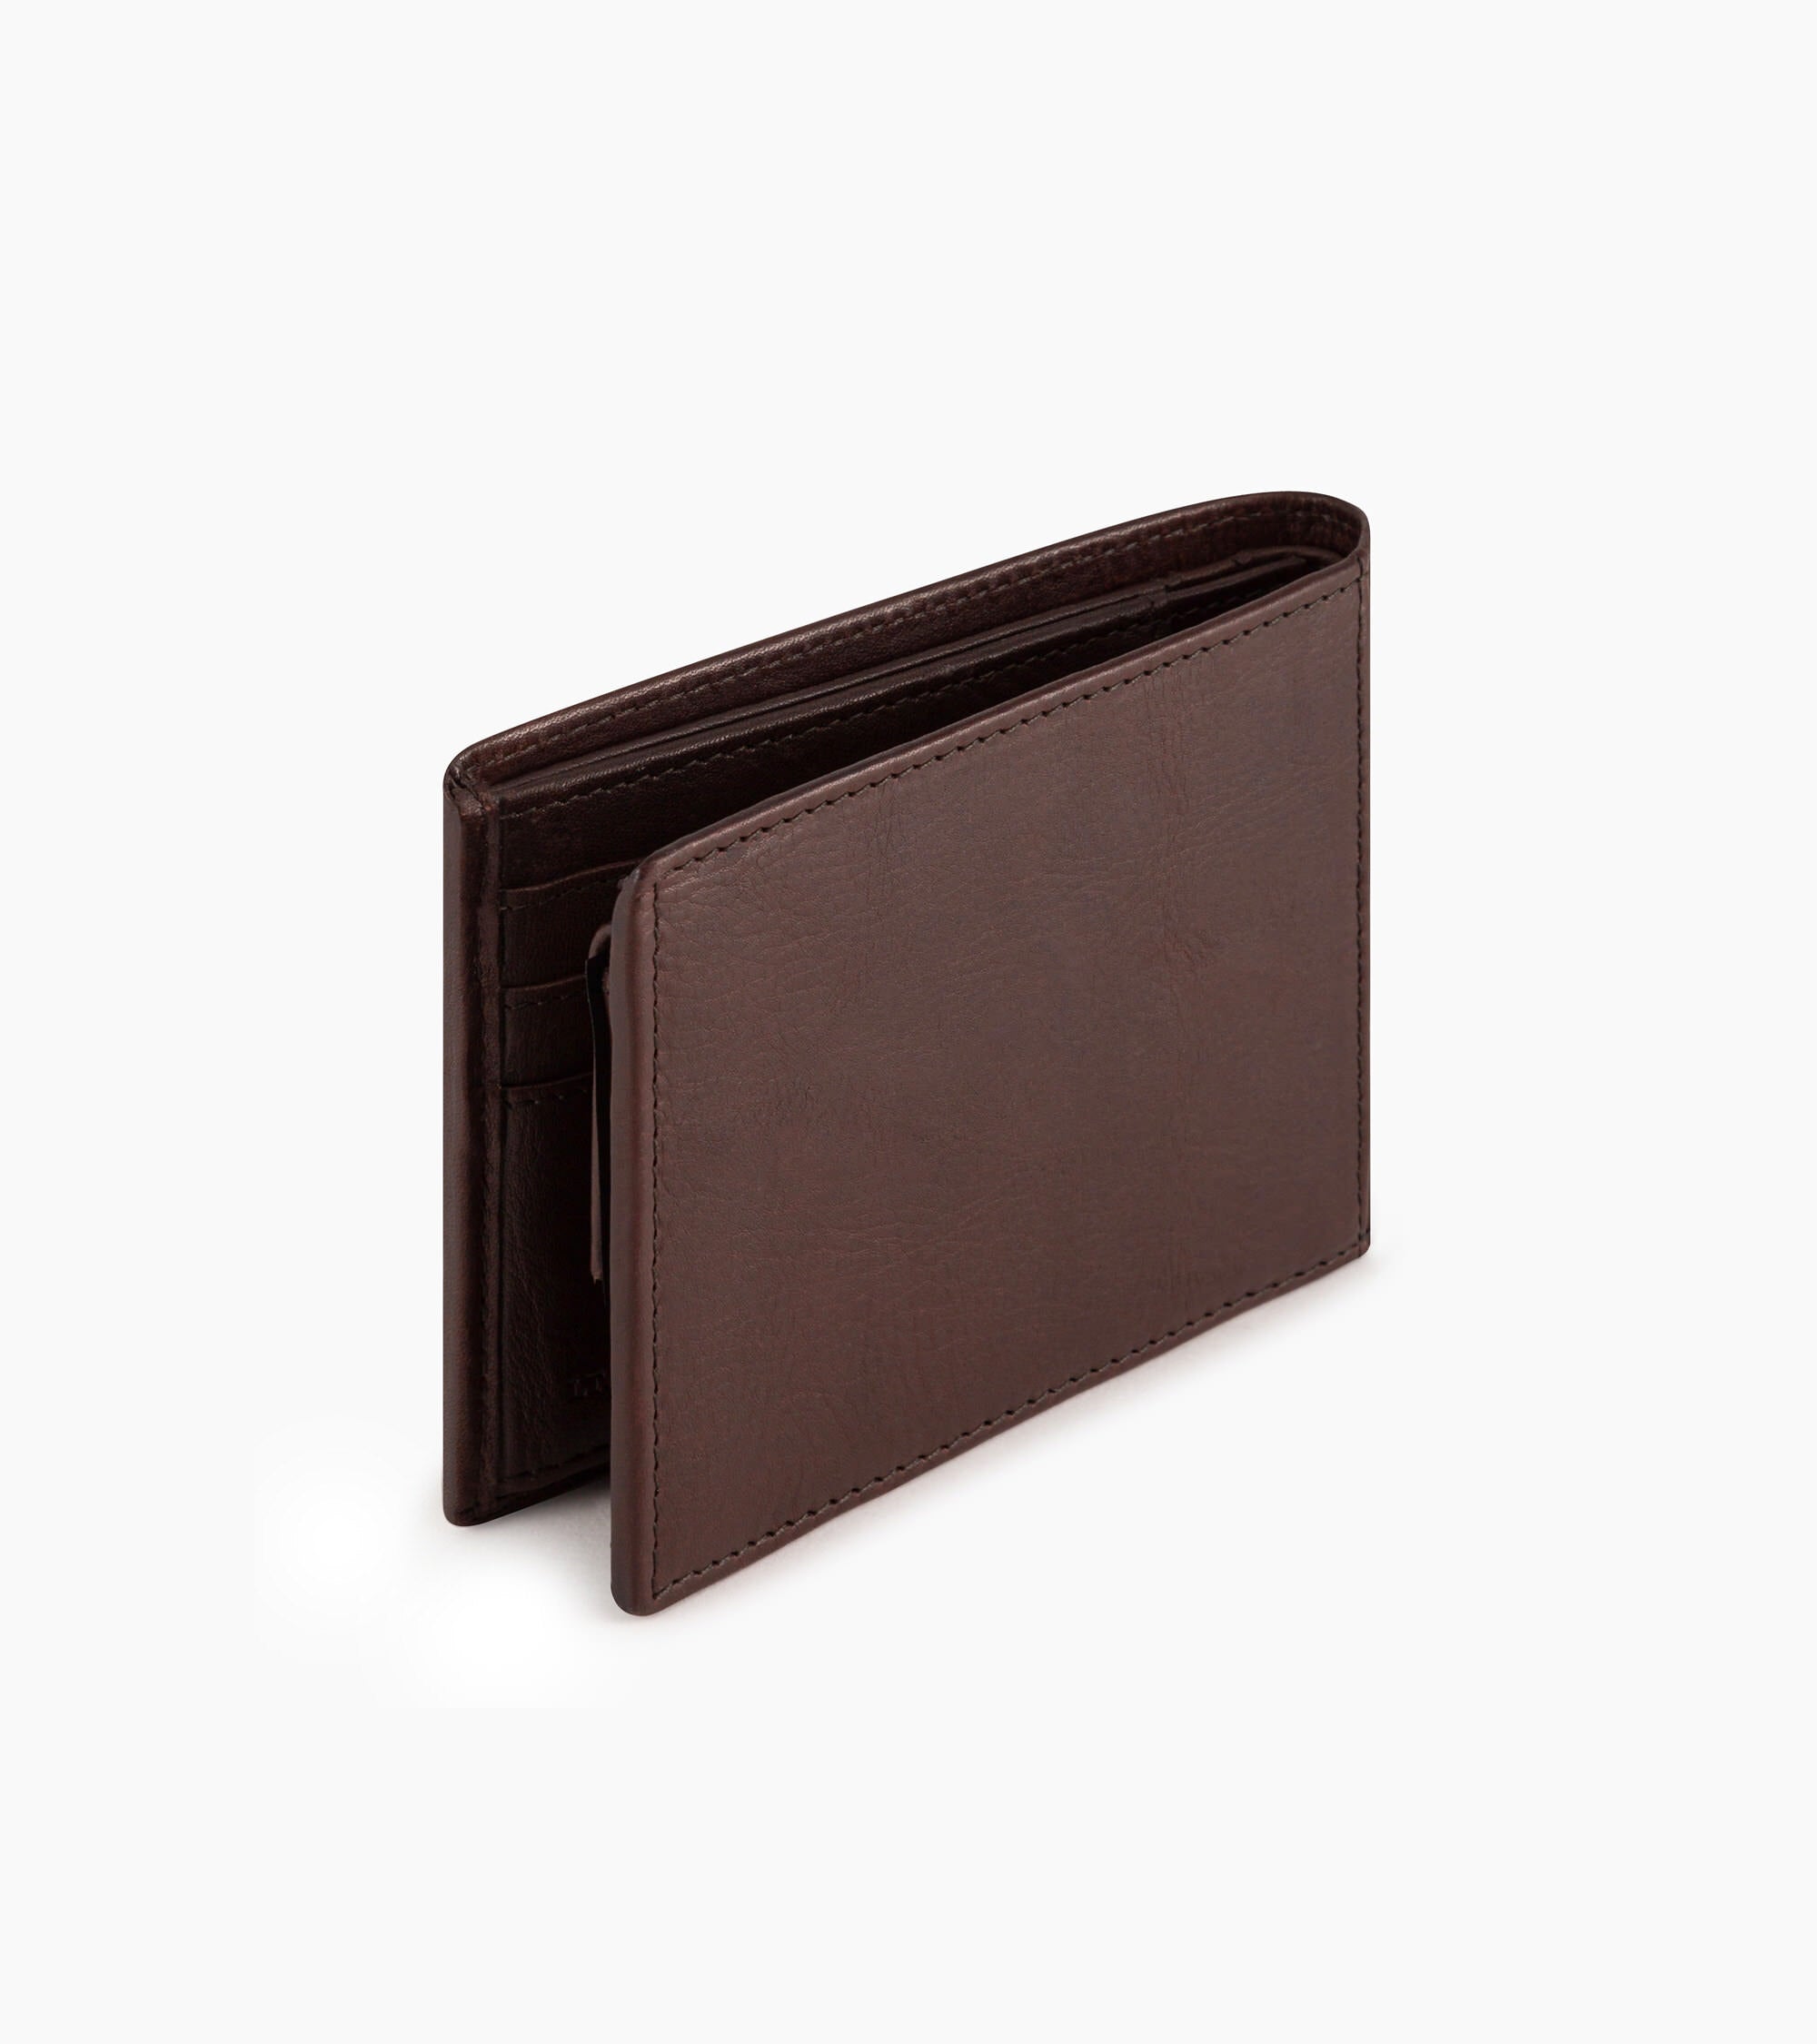 Gary horizontal zipped pocket wallet in oiled leather